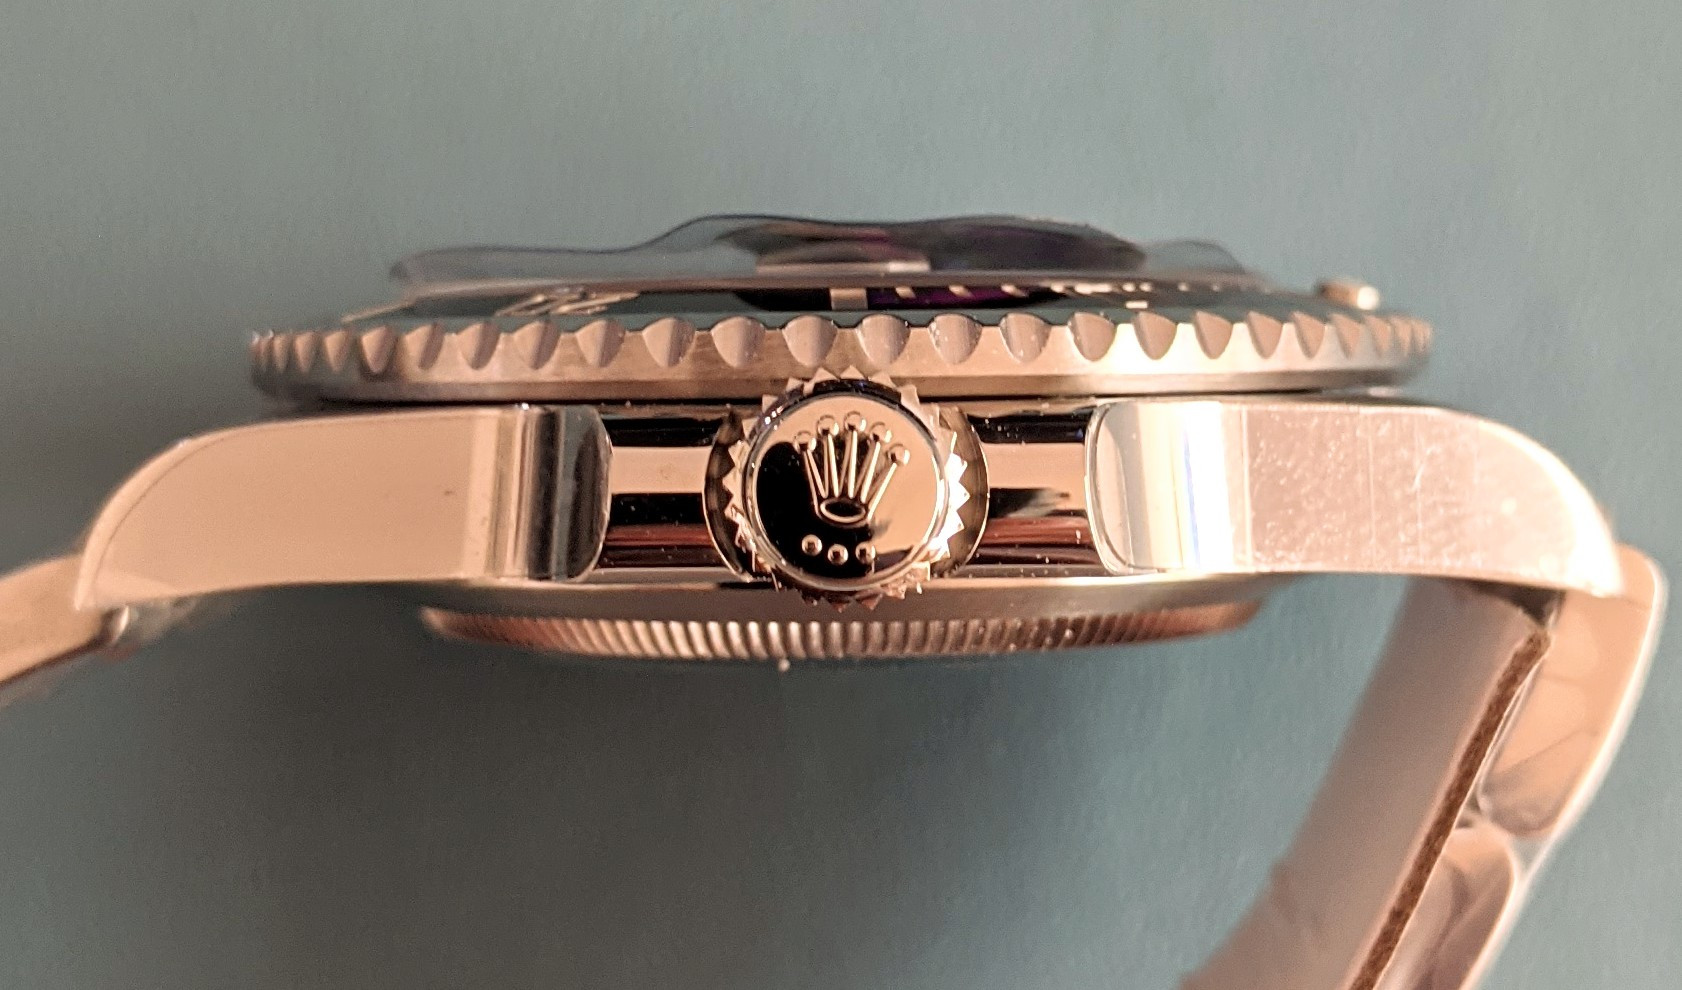 Review: Noob Submariner 126610LN with A2824